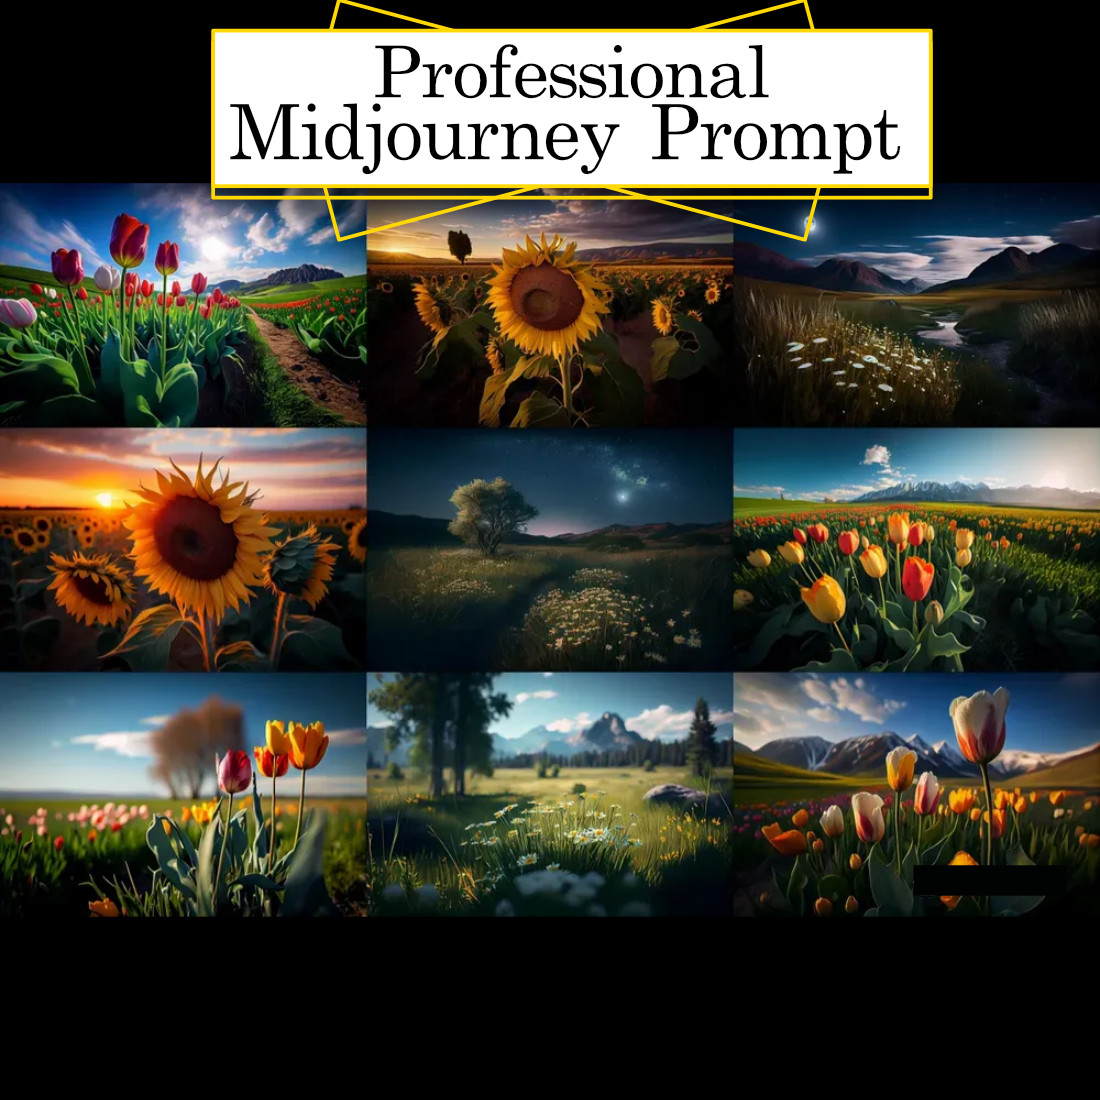 Flower Field Photography Midjourney Prompt cover image.